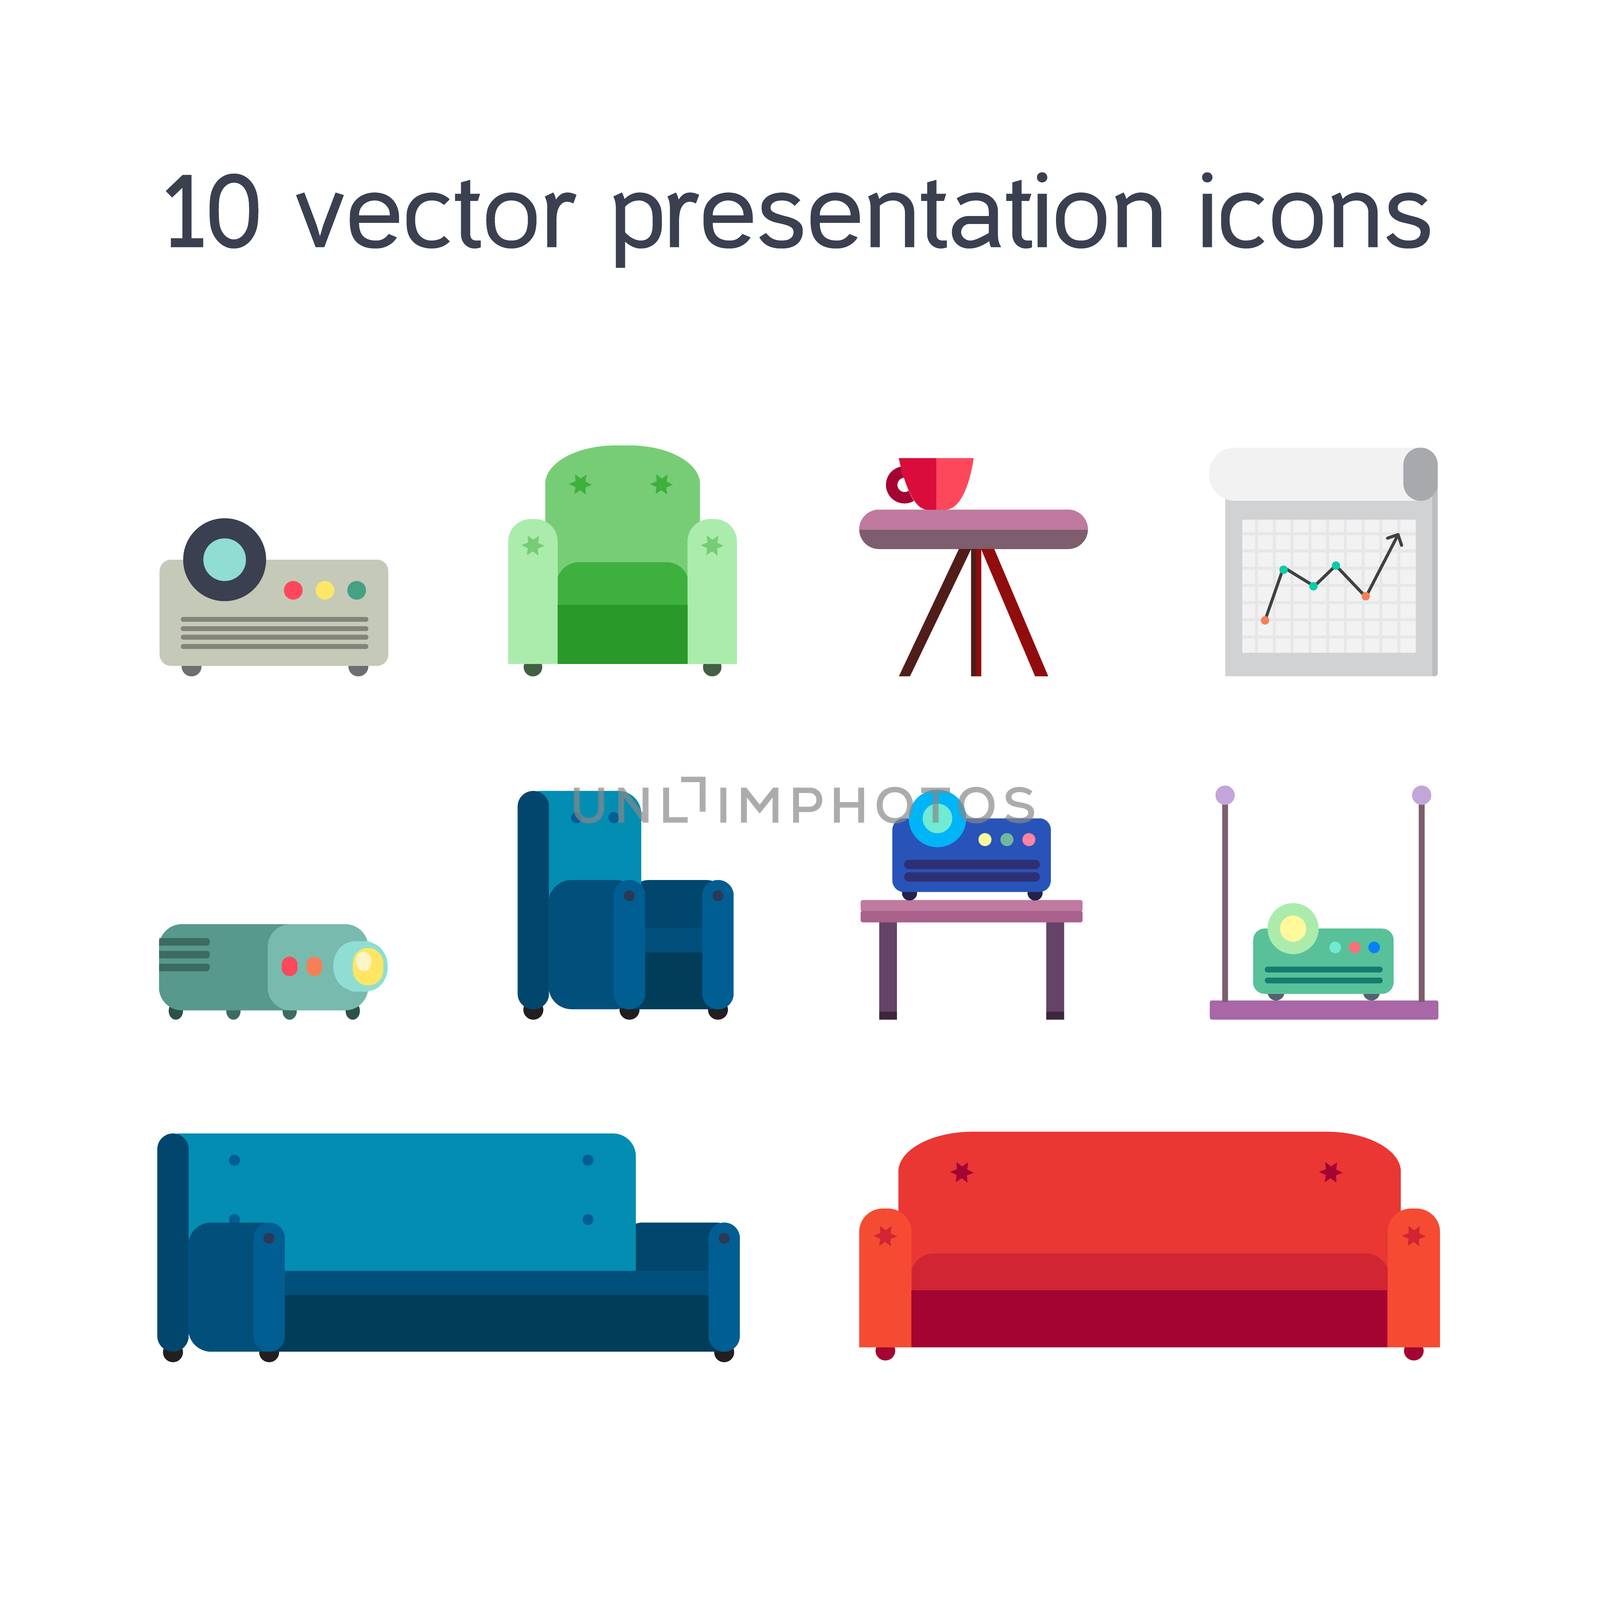 Office work icons set of projector, board bollard and comfortable seats for multimedia presentation sessions in modern style. Vector